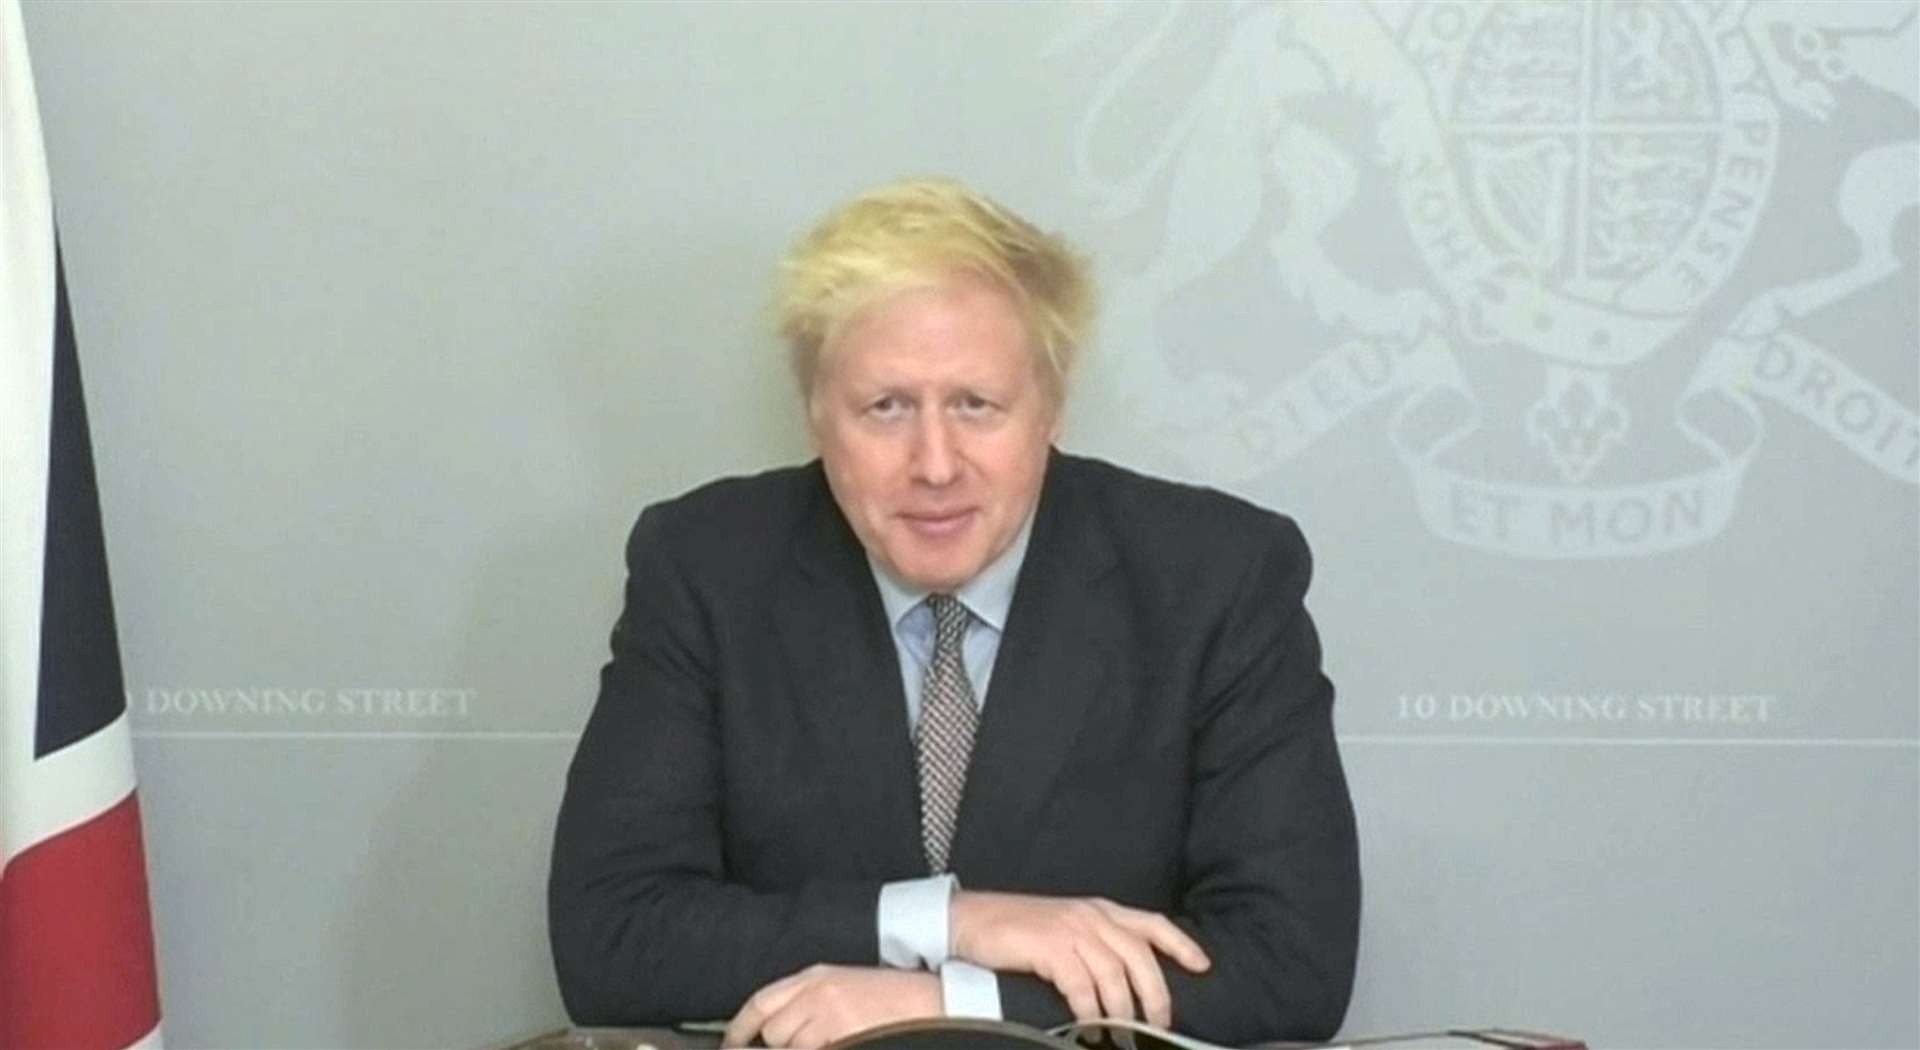 Boris Johnson was speaking via video link from Downing Street (House of Commons/PA).